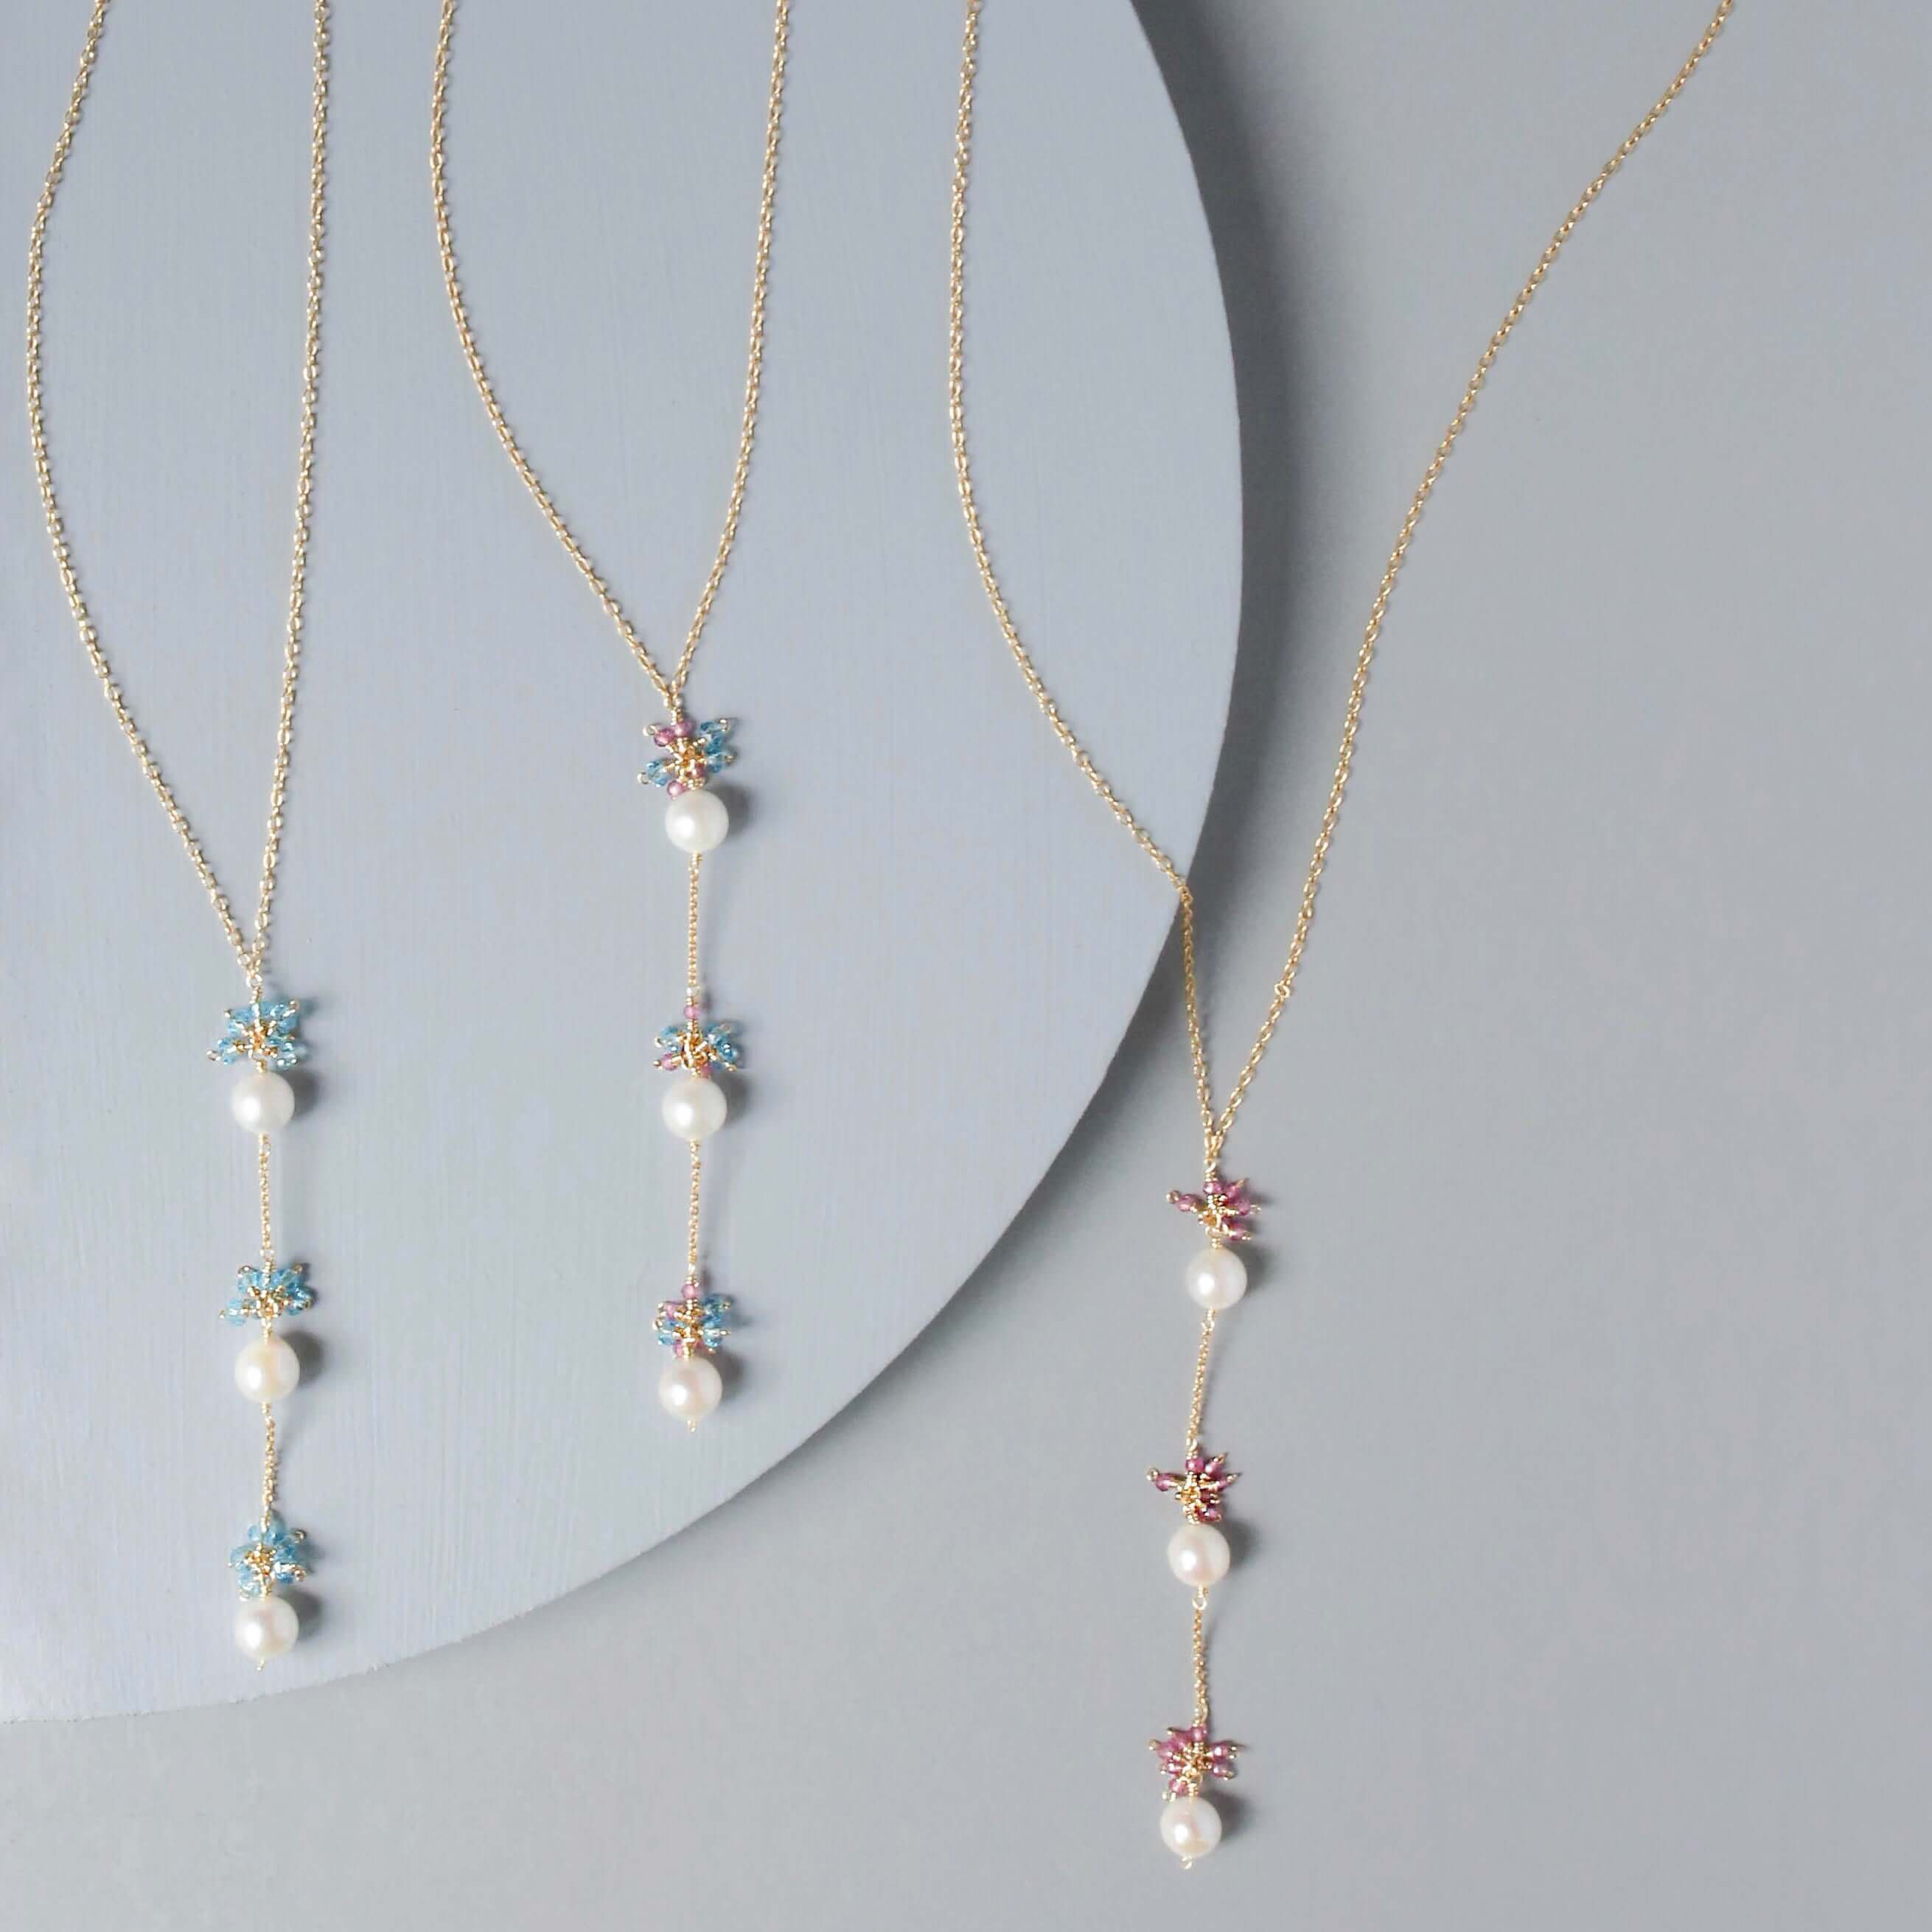 Gold plated Necklace with 3 white freshwater bead pearls paired with genuine aquamarine quartz and pink quartz gemstones